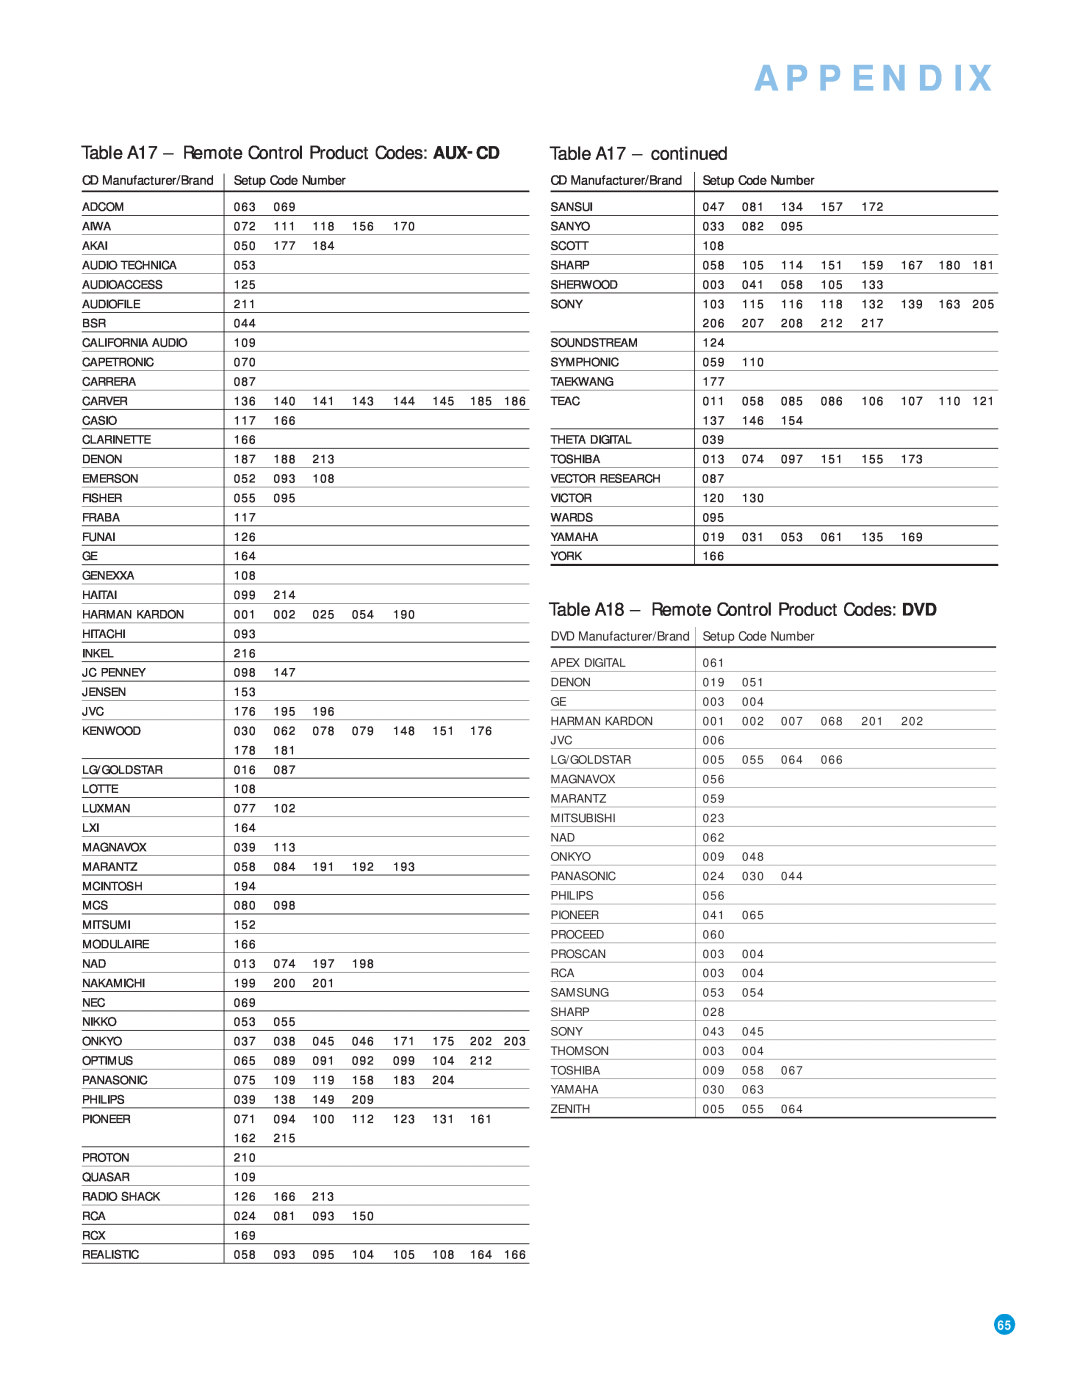 Harman-Kardon AVR 3550HD owner manual Table A17 – continued, Table A18 – Remote Control Product Codes: DVD, Appendix 